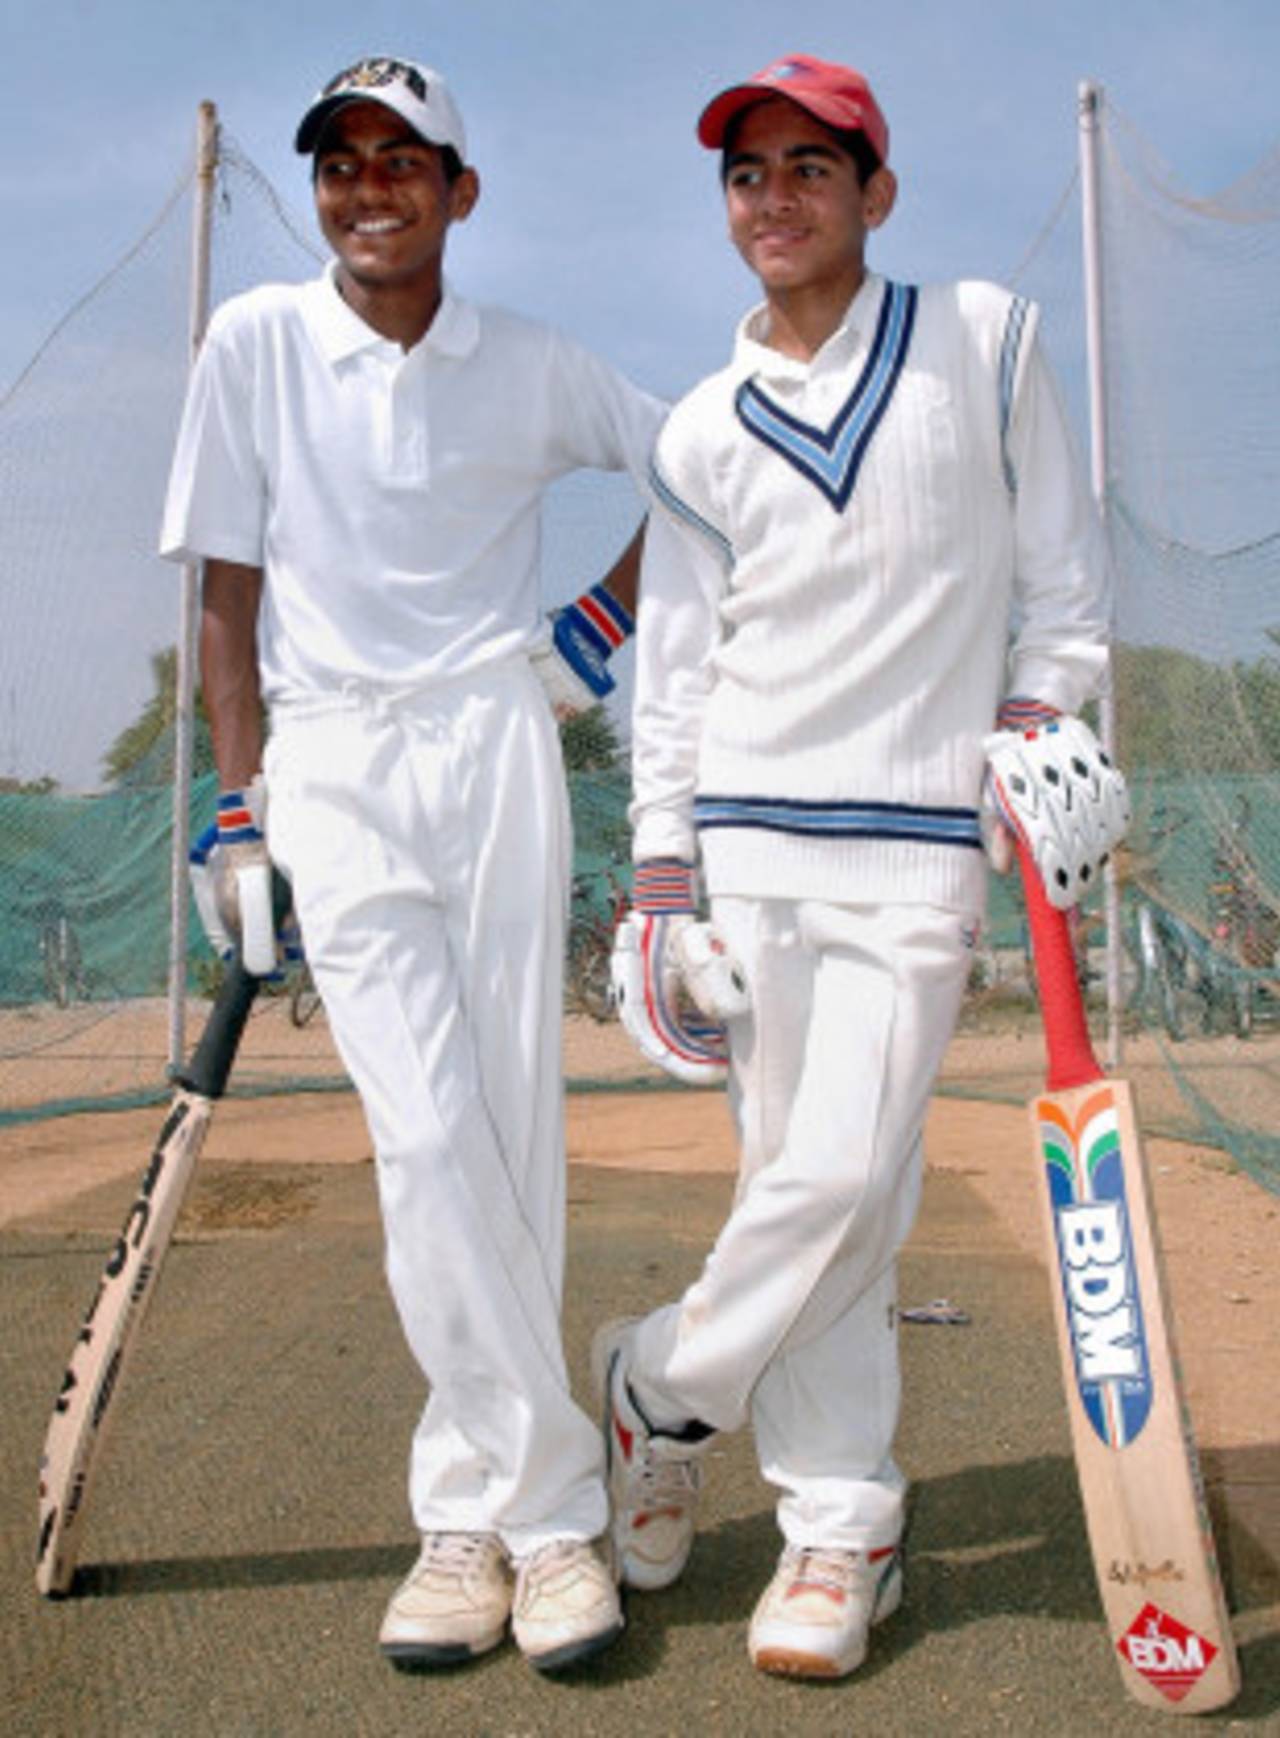 Manoj Kumar and Mohammed Shaibaz pose after their world-record stand of 721, St Peter's High School v St Phillip's High School, Hyderabad, November 15, 2006